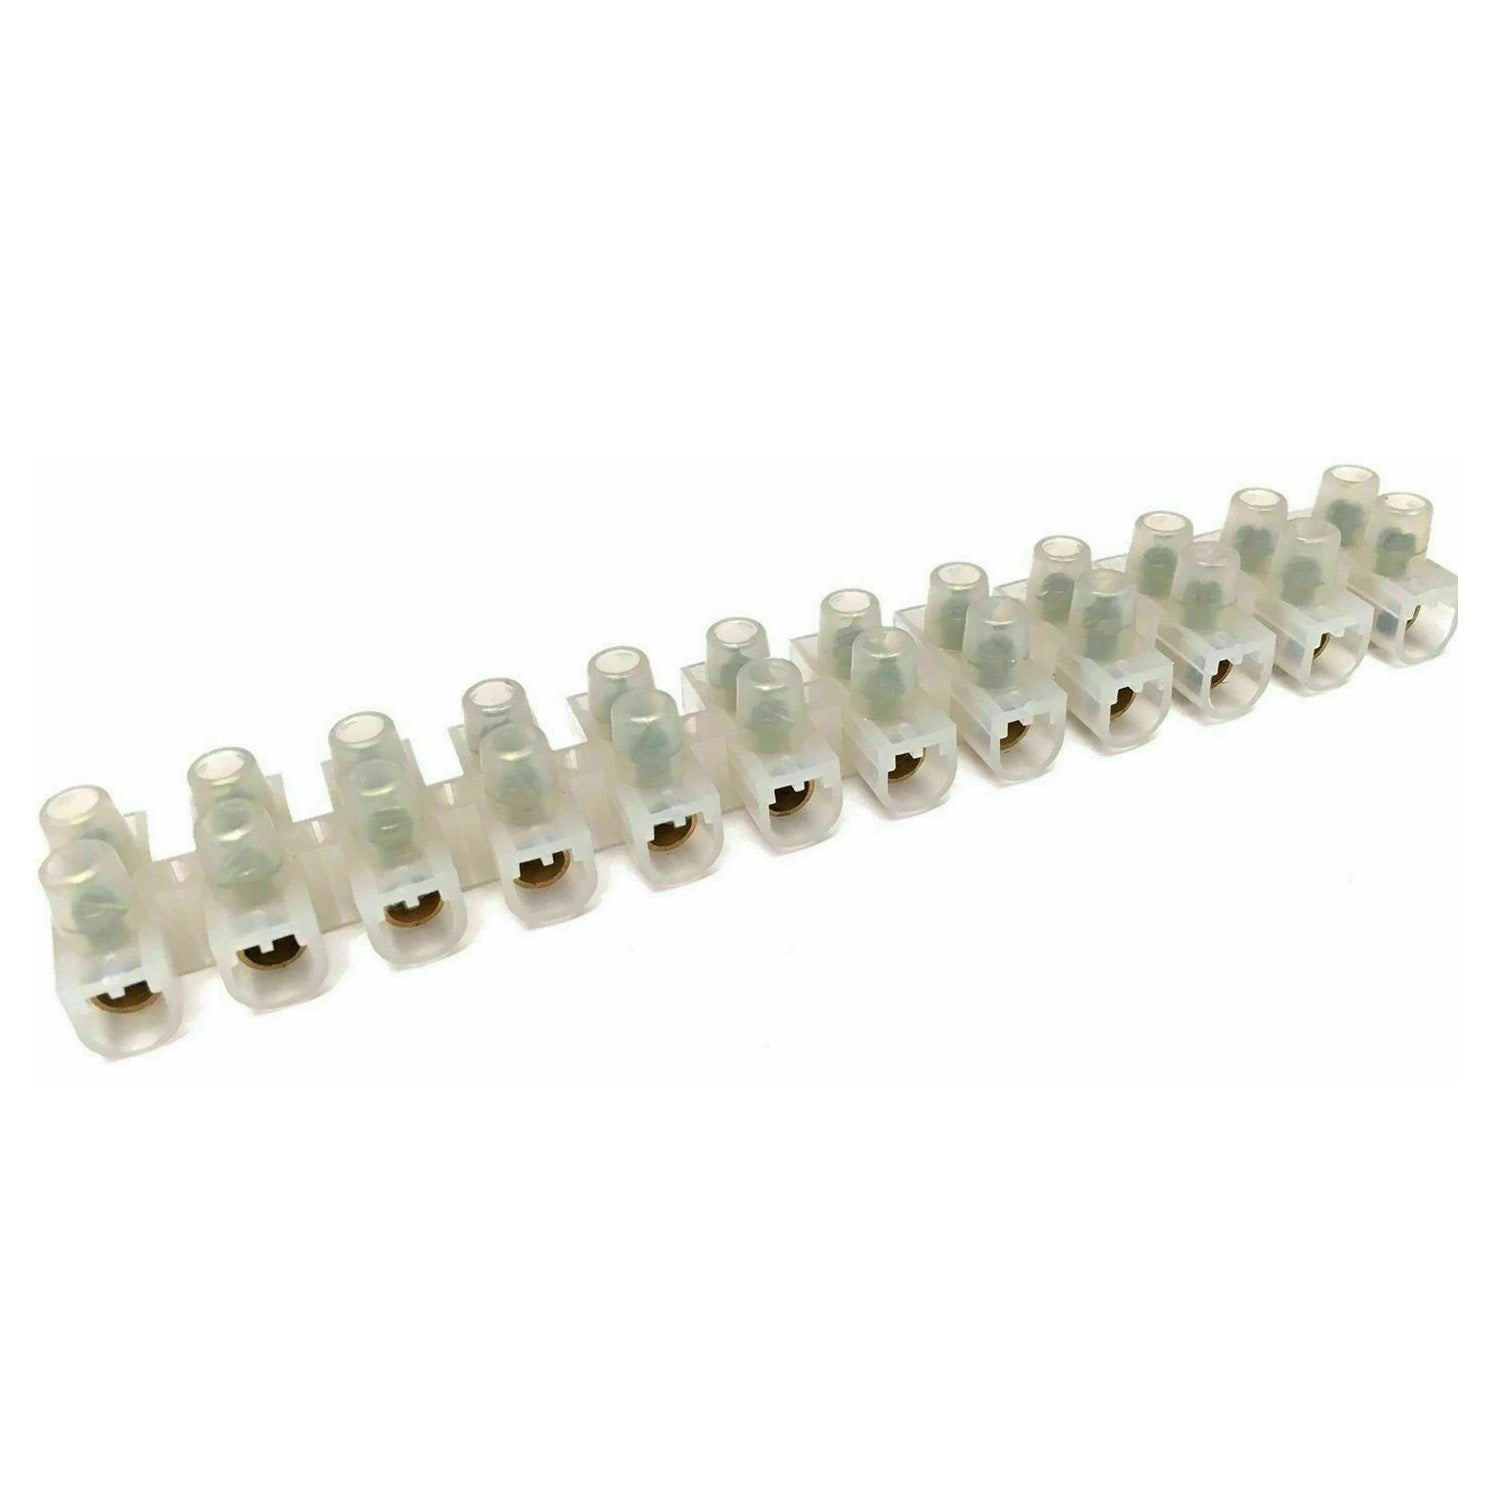 12 way connector strip electrical choc block wire terminal connection